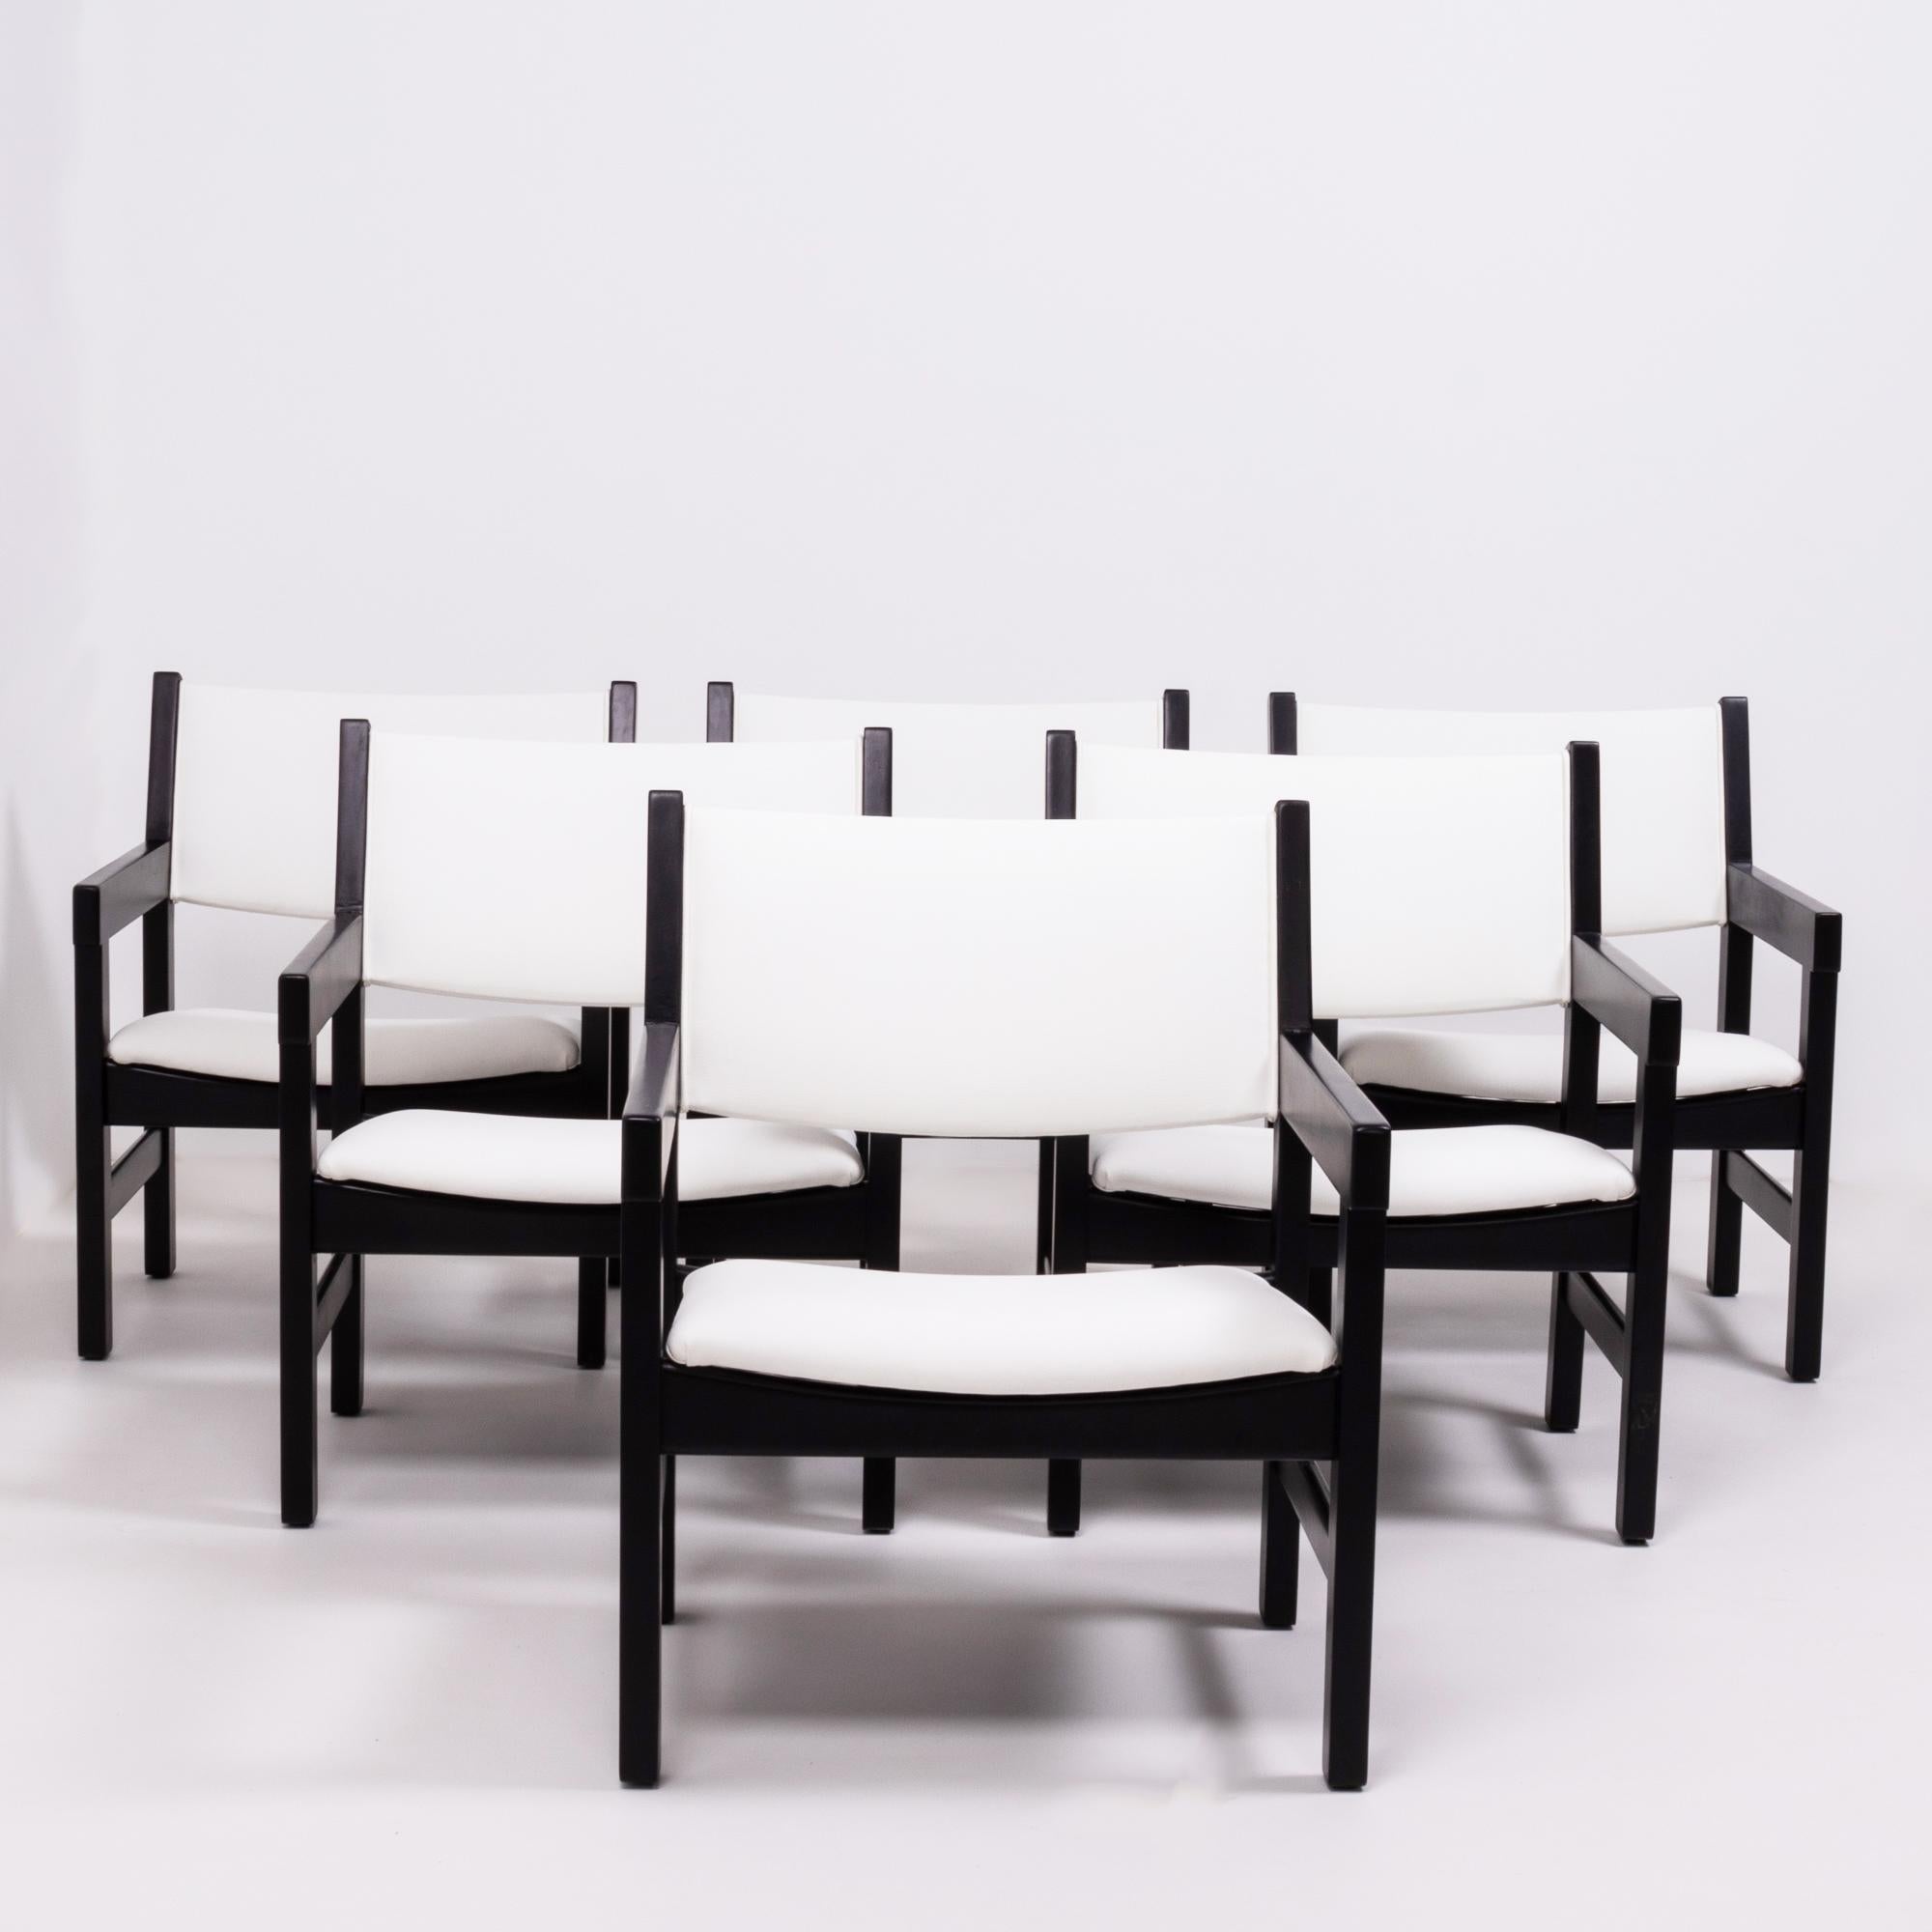 Designed by Hans J. Wegner for GETAMA, this set of six GE 151 chairs are a Classic example of Mid-Century Modern design.

Featuring angular black painted beechwood frames and arms, the newly restored chairs have padded seats and backrests which